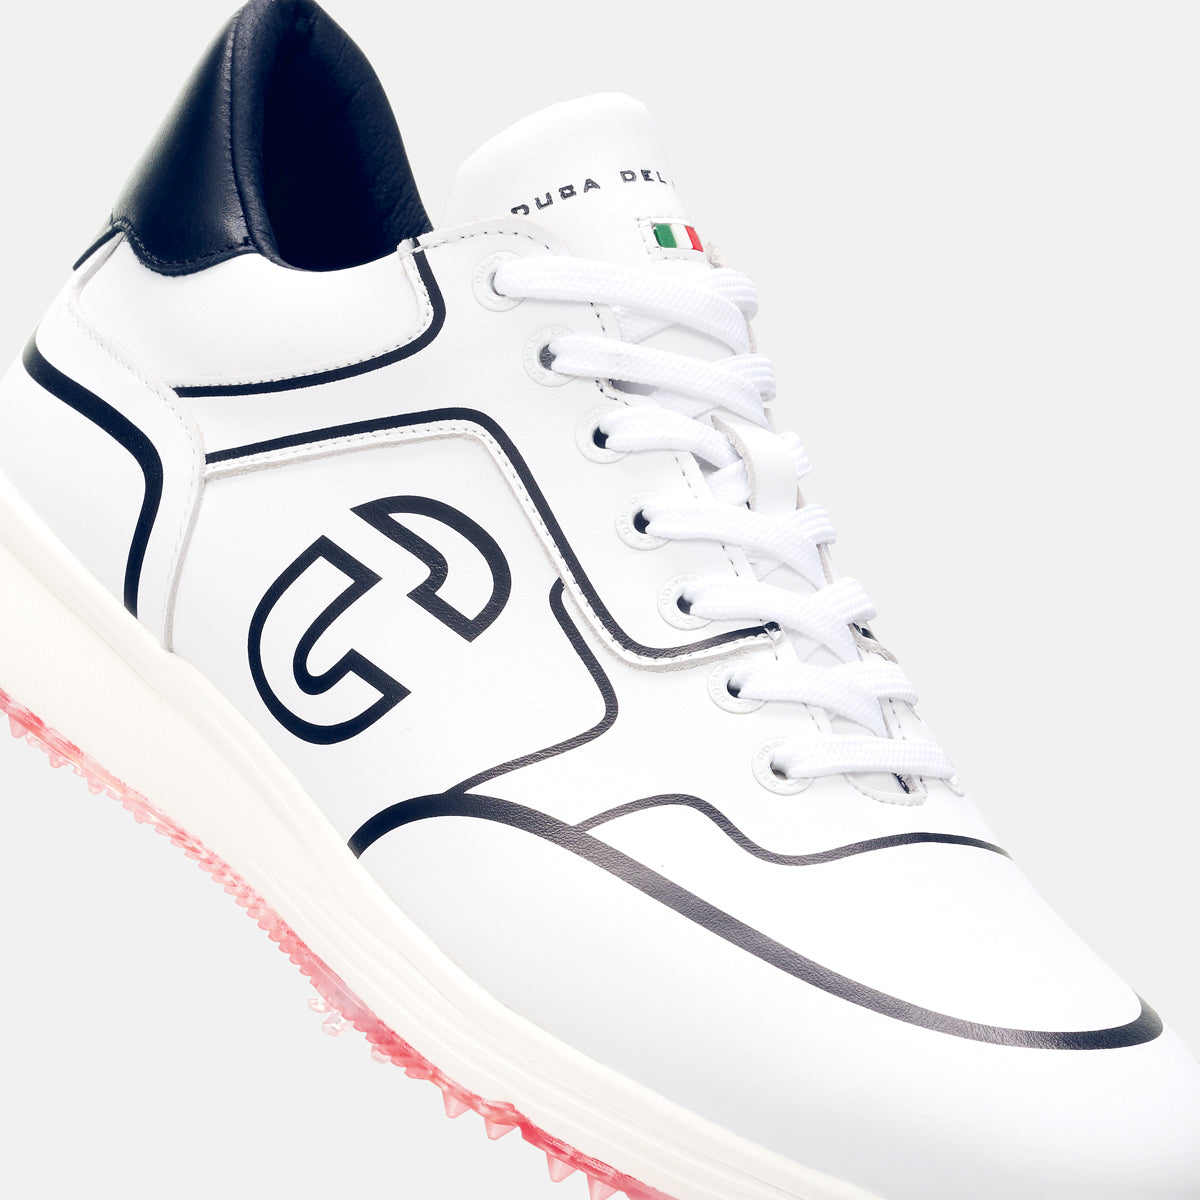 Orlando Pro Spike golf shoe for men. Professional golf shoe for on the golf course